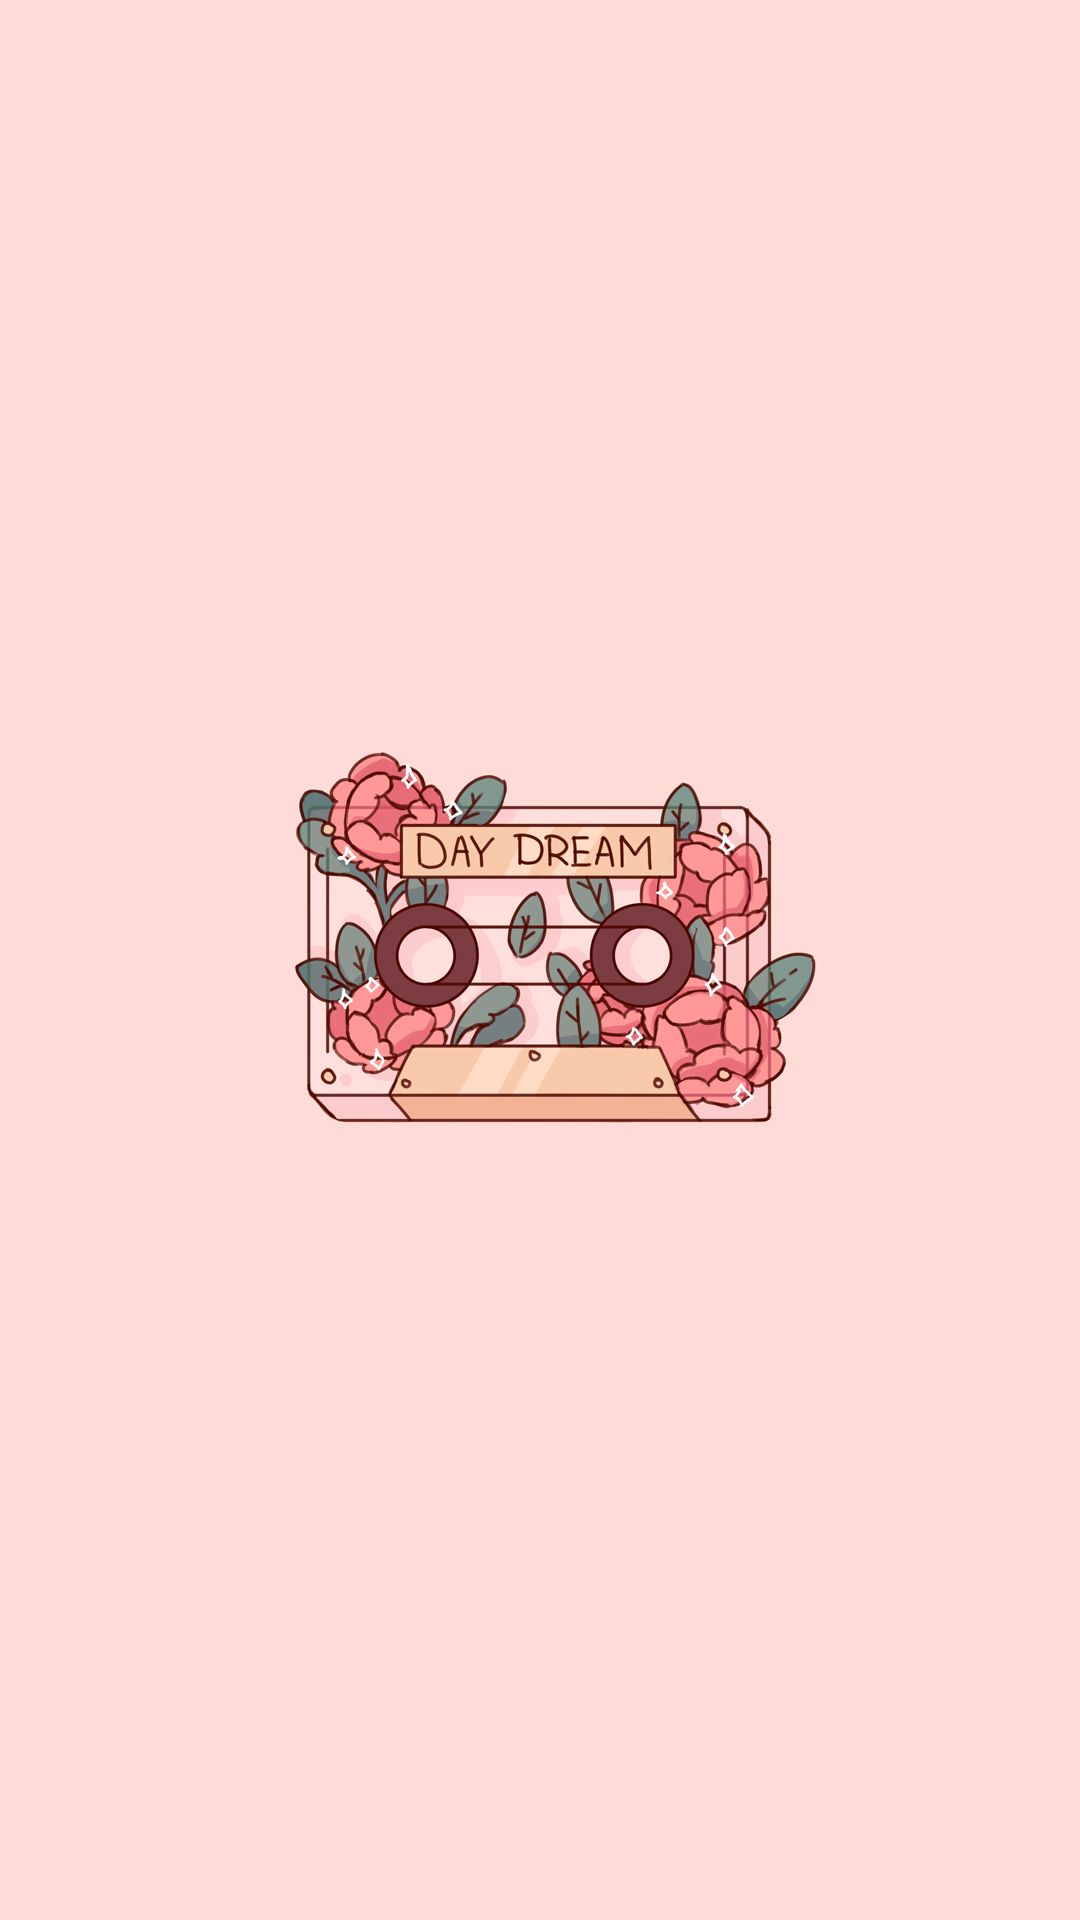 Cute Pink Romantic Day Dream Cassette Phone Wallpaper Doodle Drawing